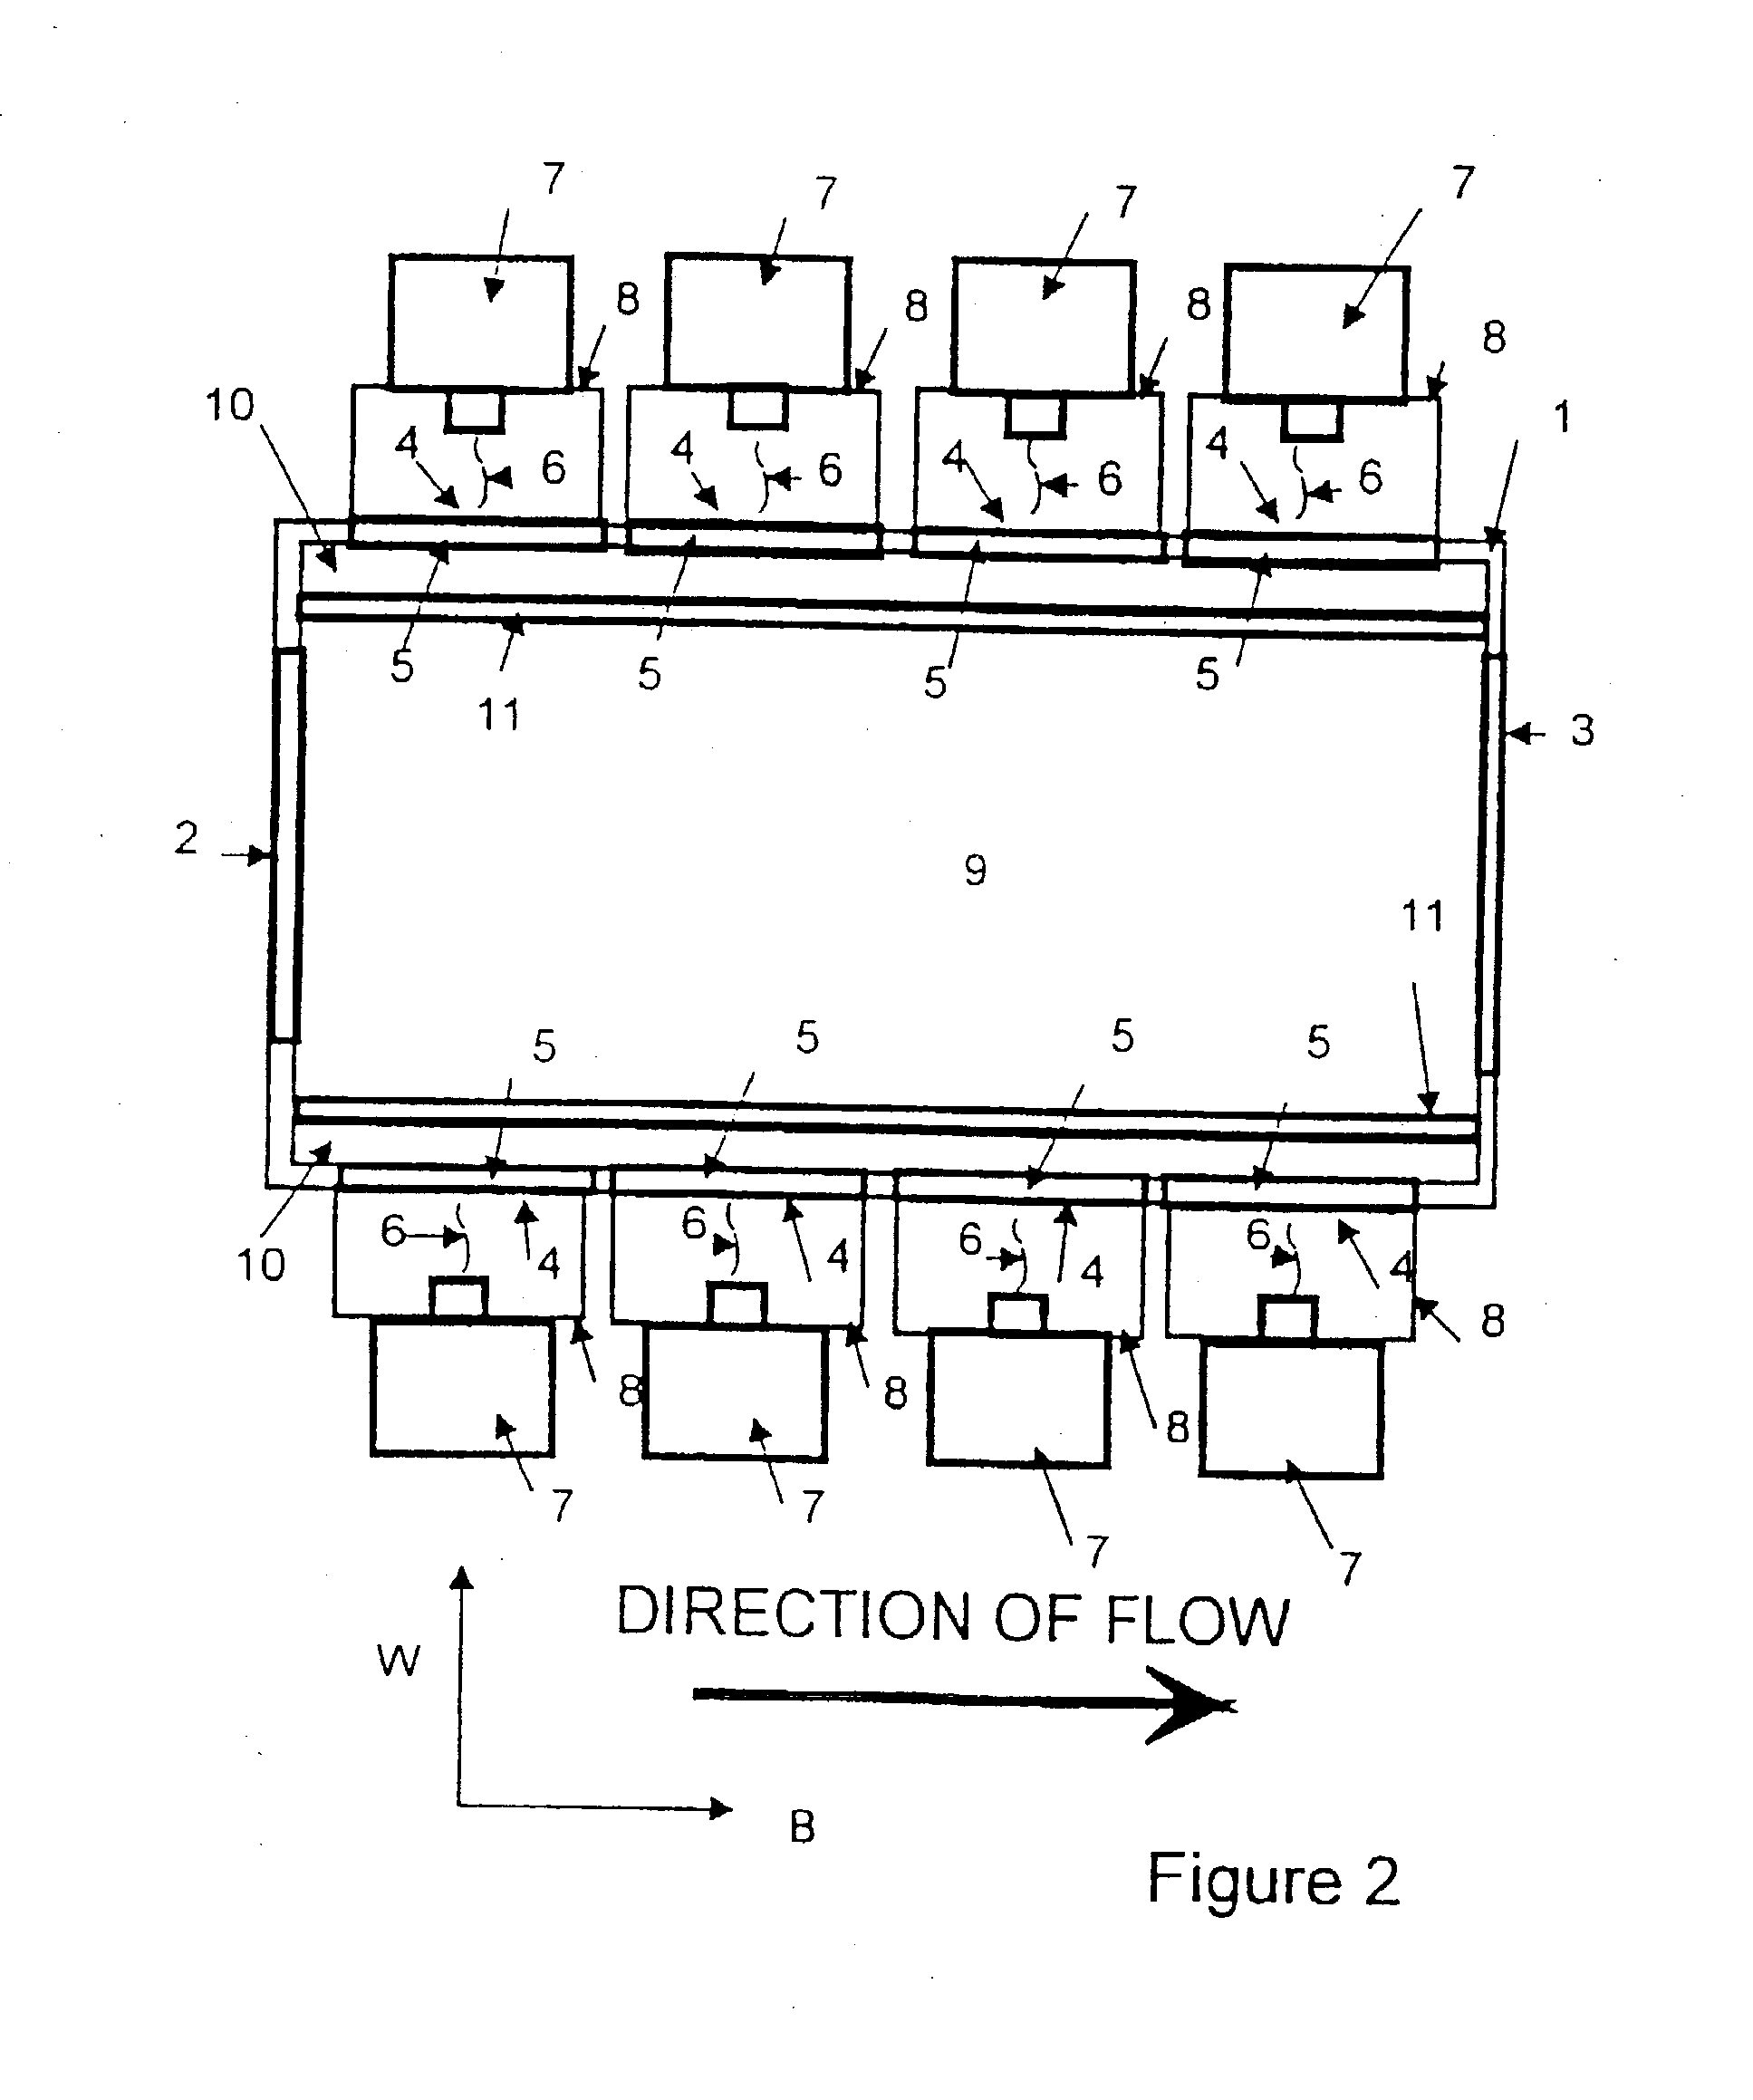 Field concentrators for artificial dielectric systems and devices